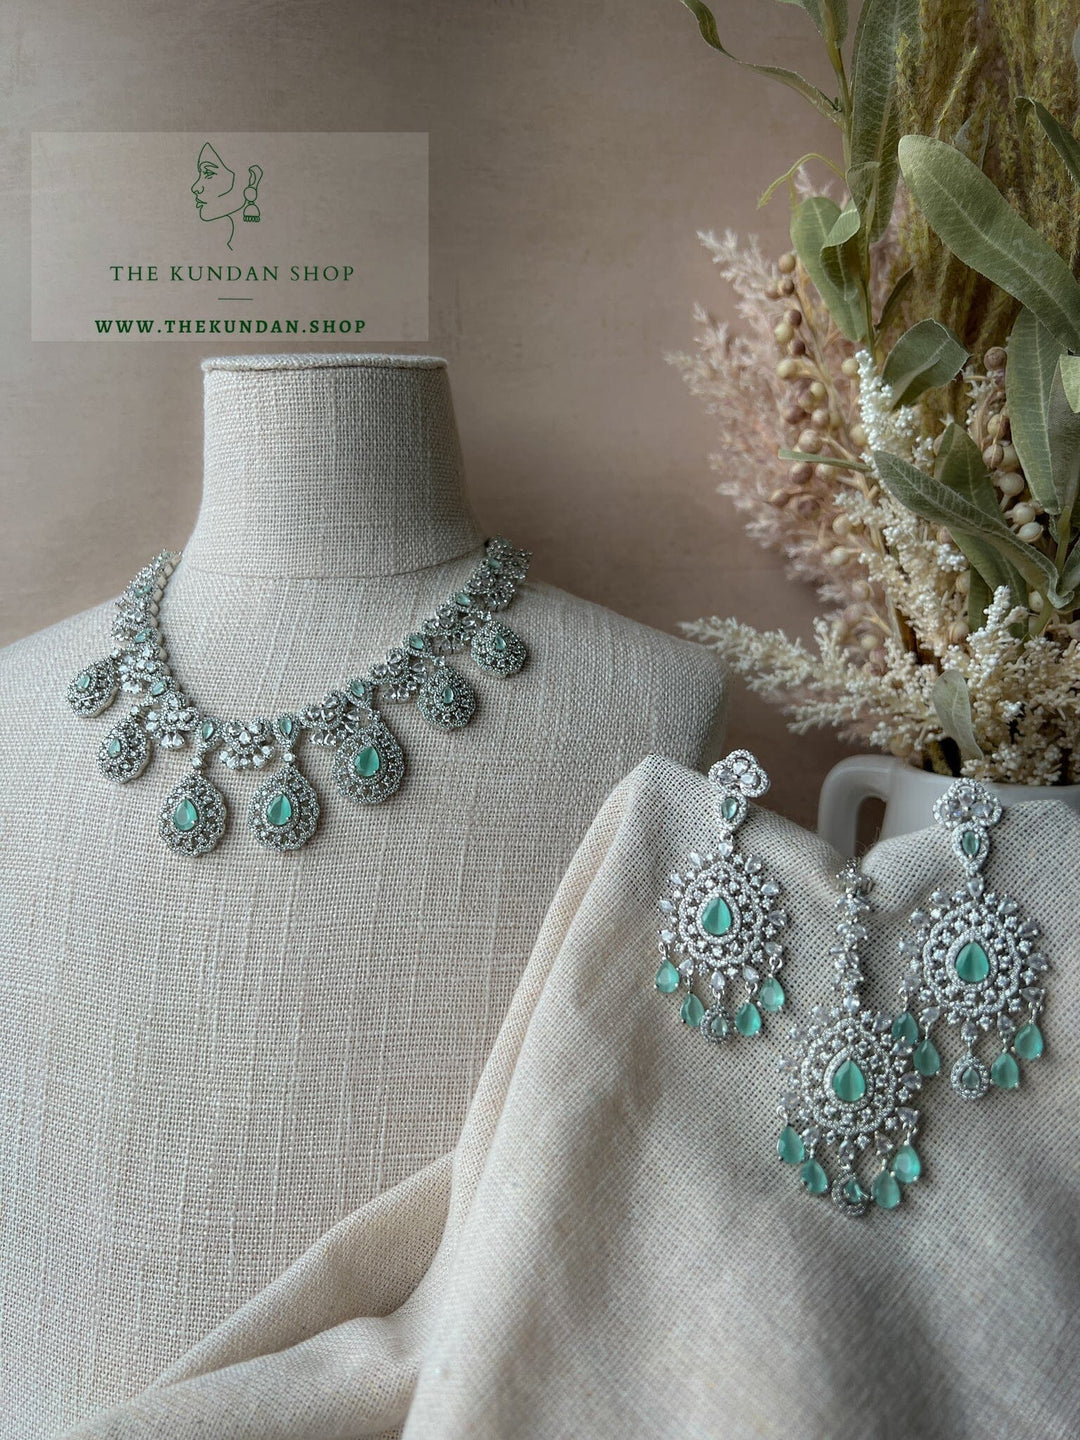 Resilient in Silver & Mint Necklace Sets THE KUNDAN SHOP 